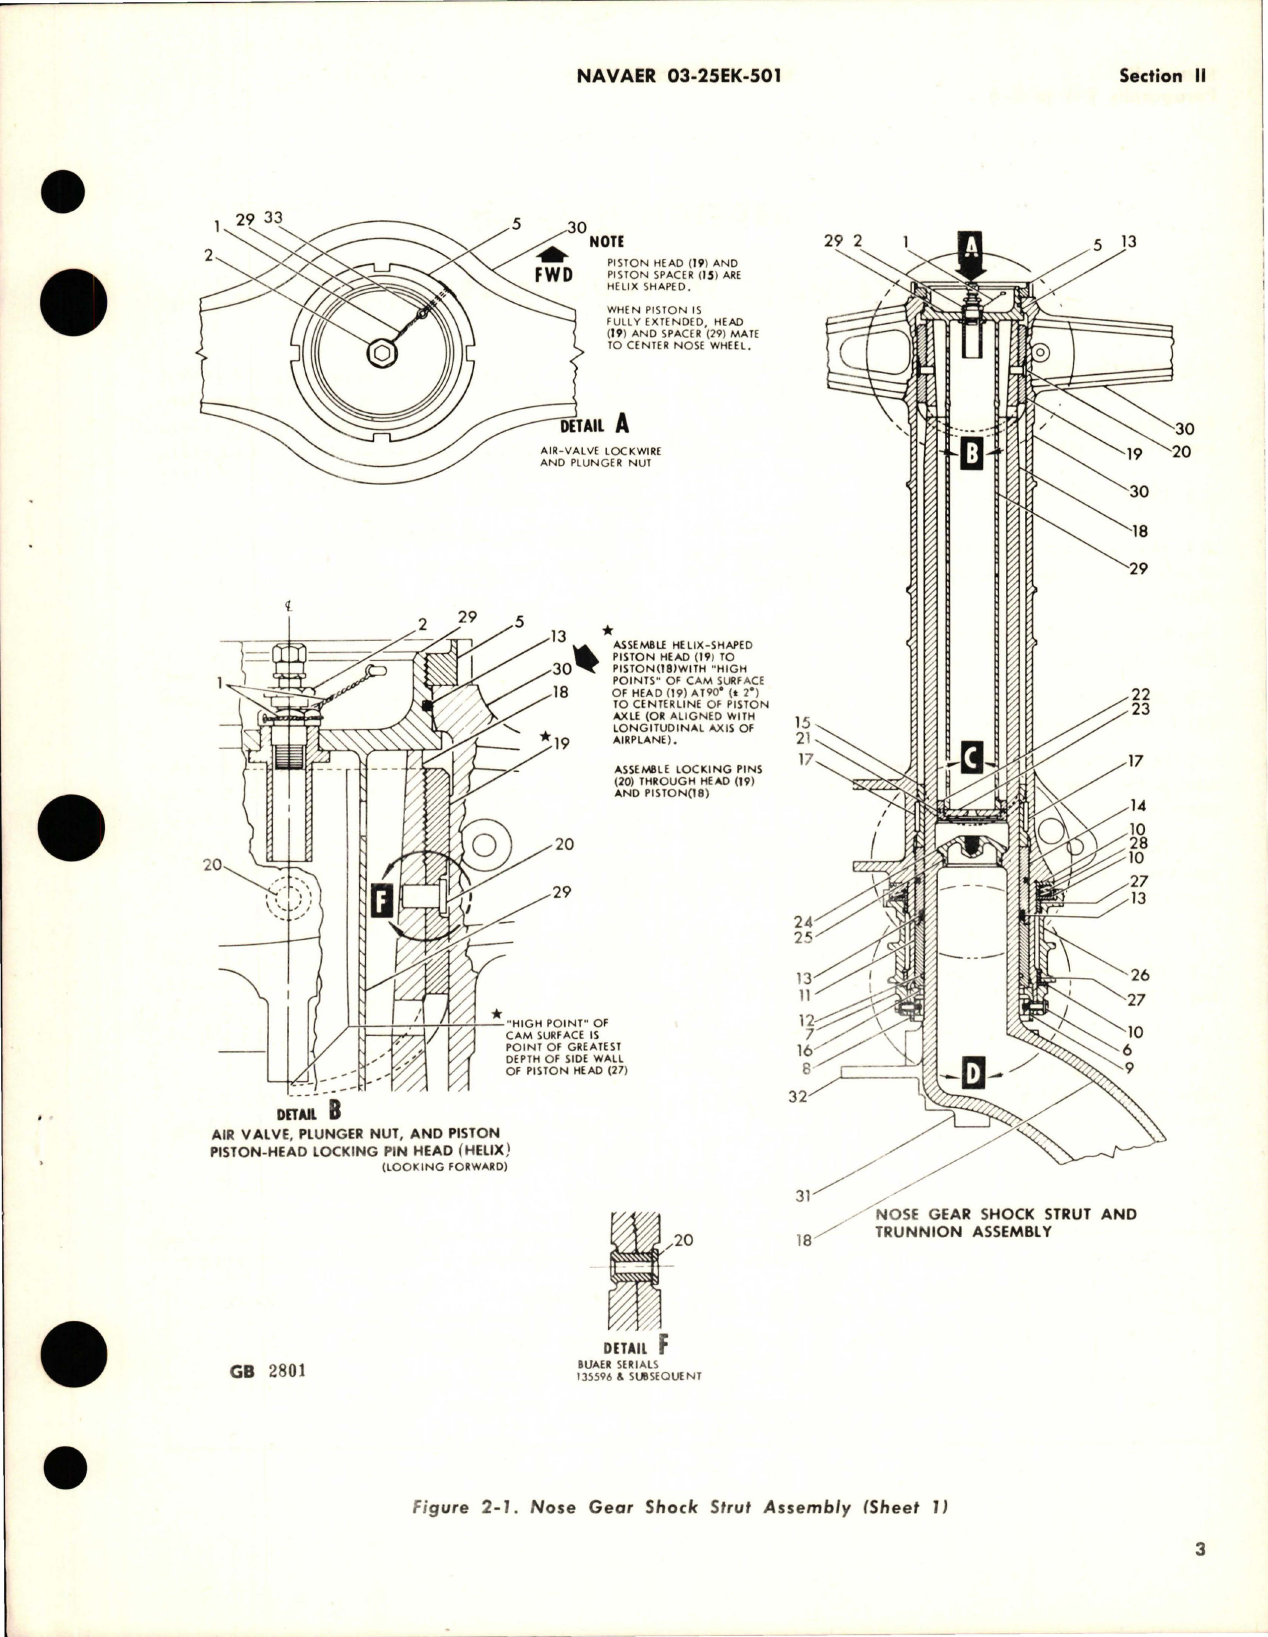 Sample page 7 from AirCorps Library document: Overhaul Instructions for Nose Landing Gear Strut Assembly - Part 661076-4